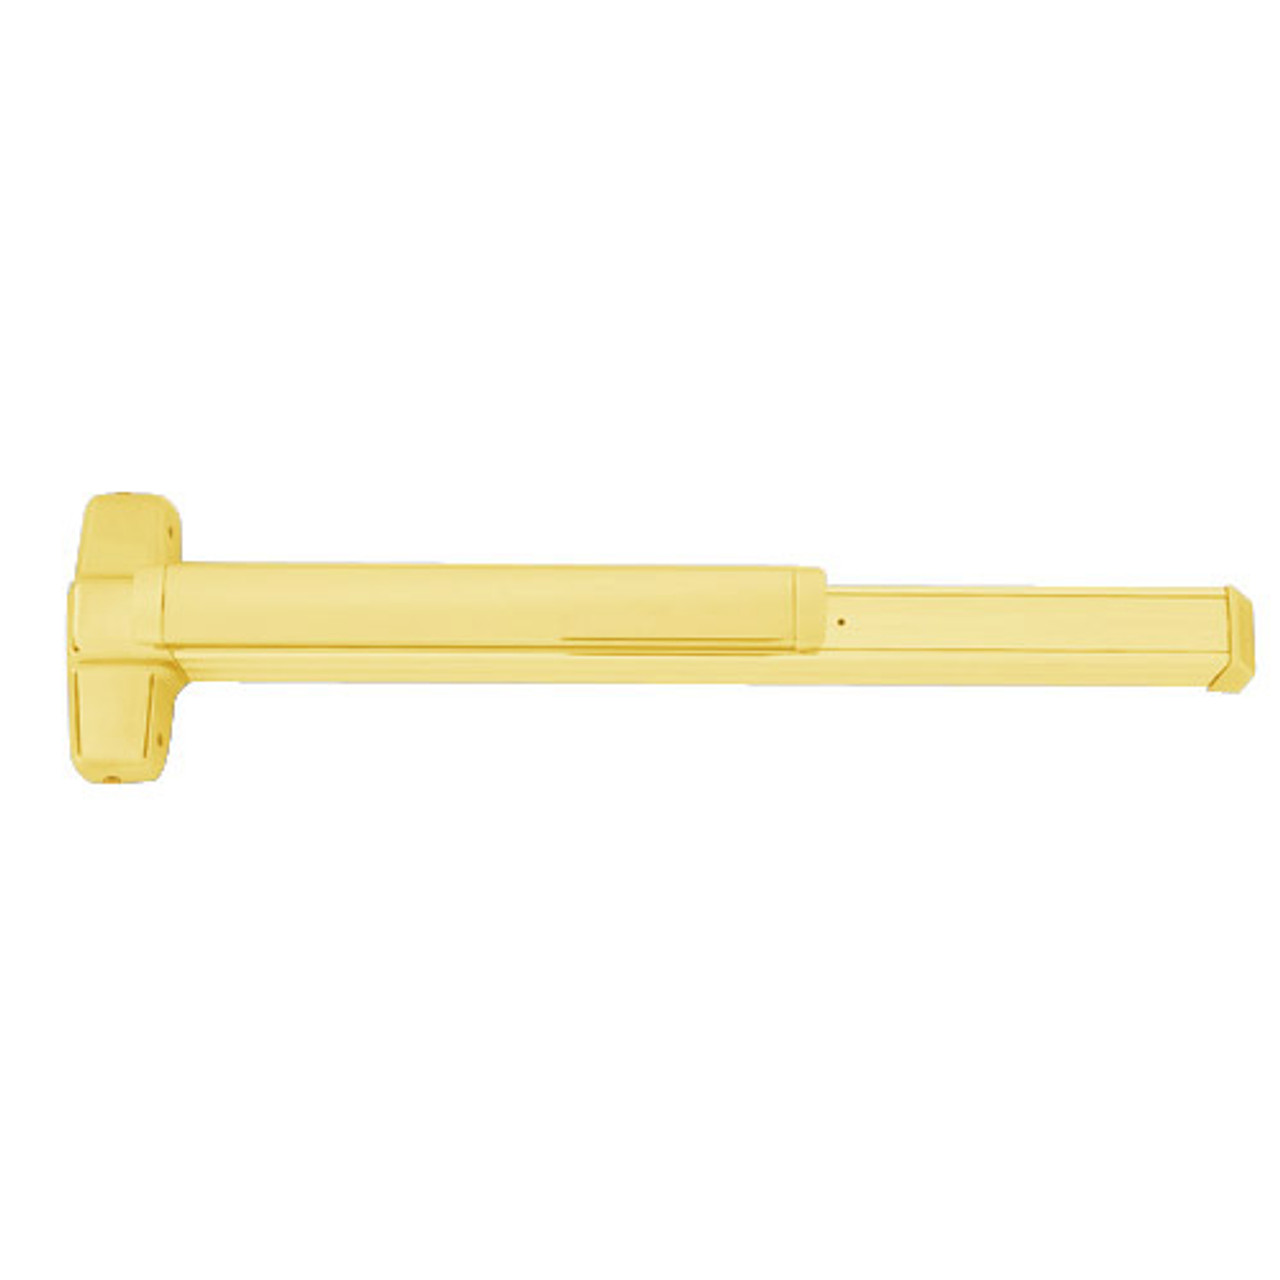 QEL9847WDC-EO-US3-4 Von Duprin Exit Device with Quiet Electric Latch in Bright Brass